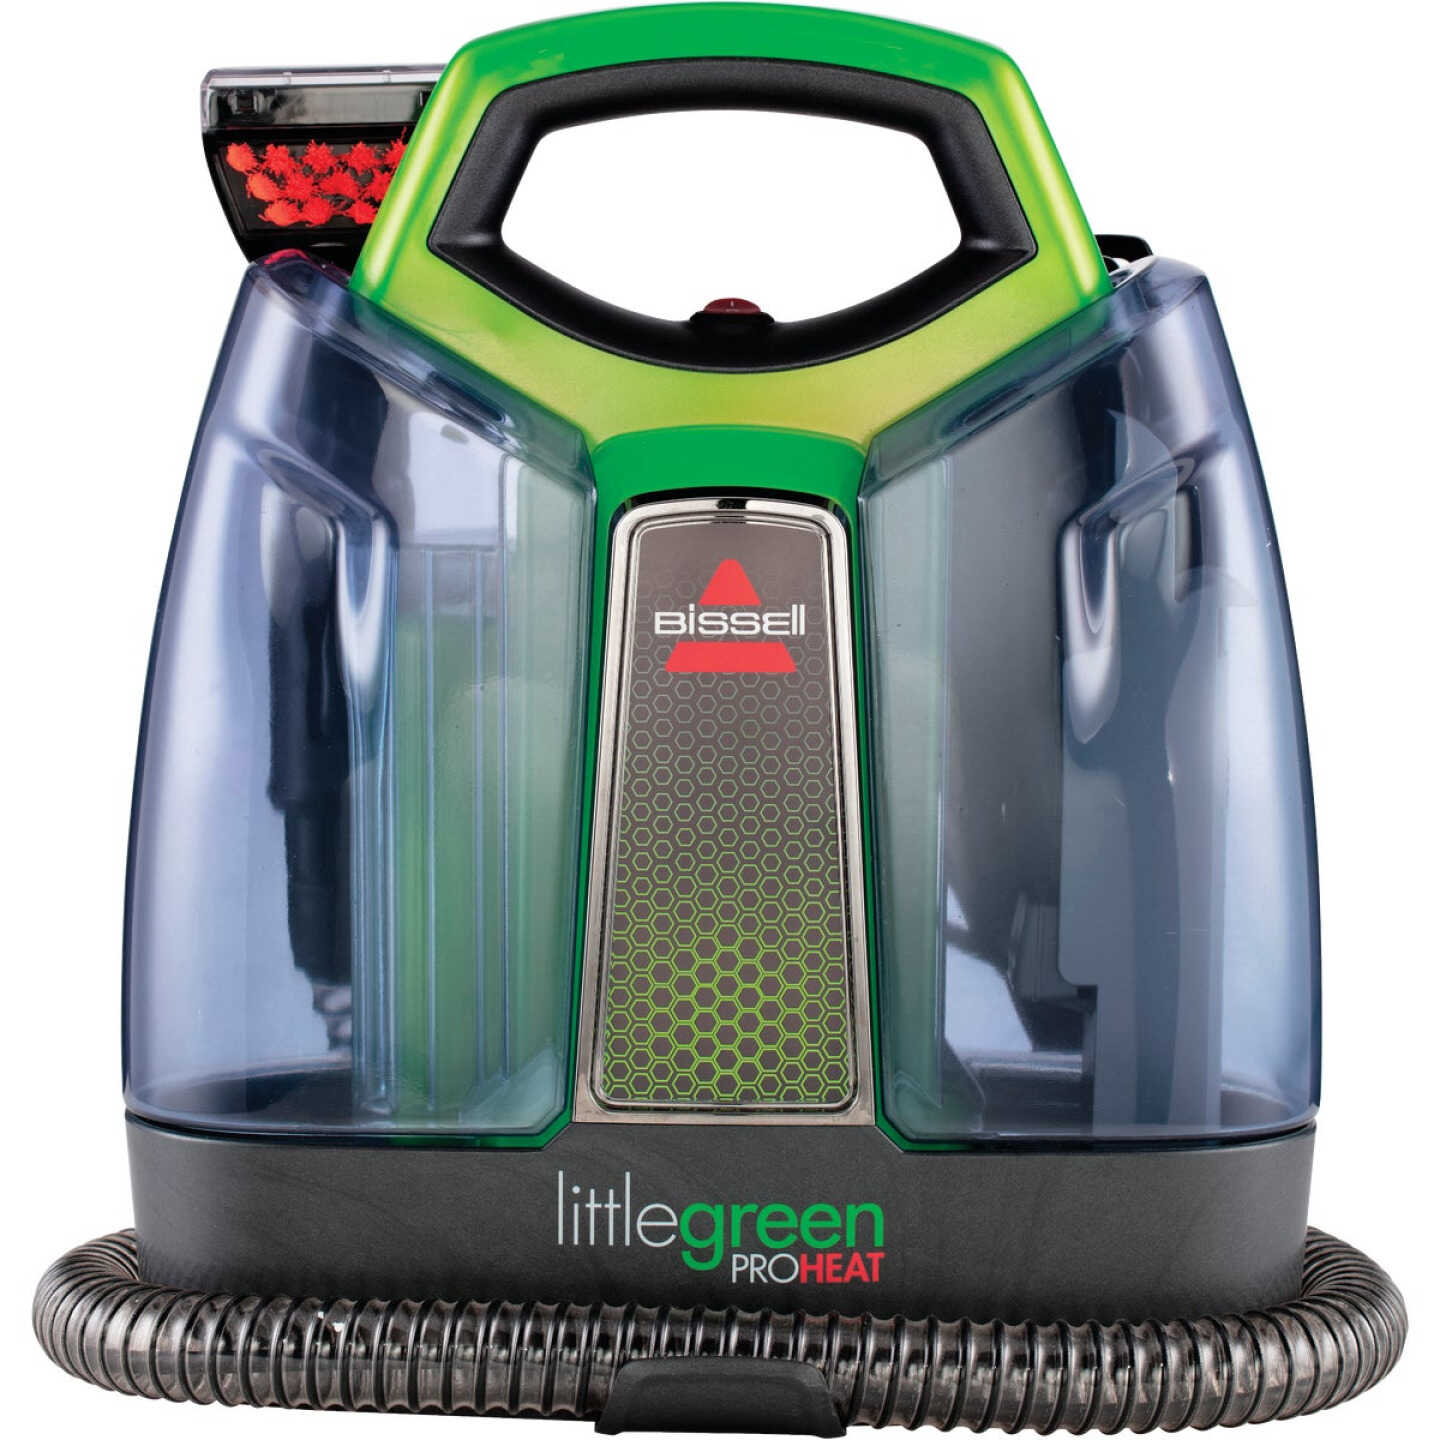 Bissell Green Machine Cleaning Maintenance and Troubleshooting No